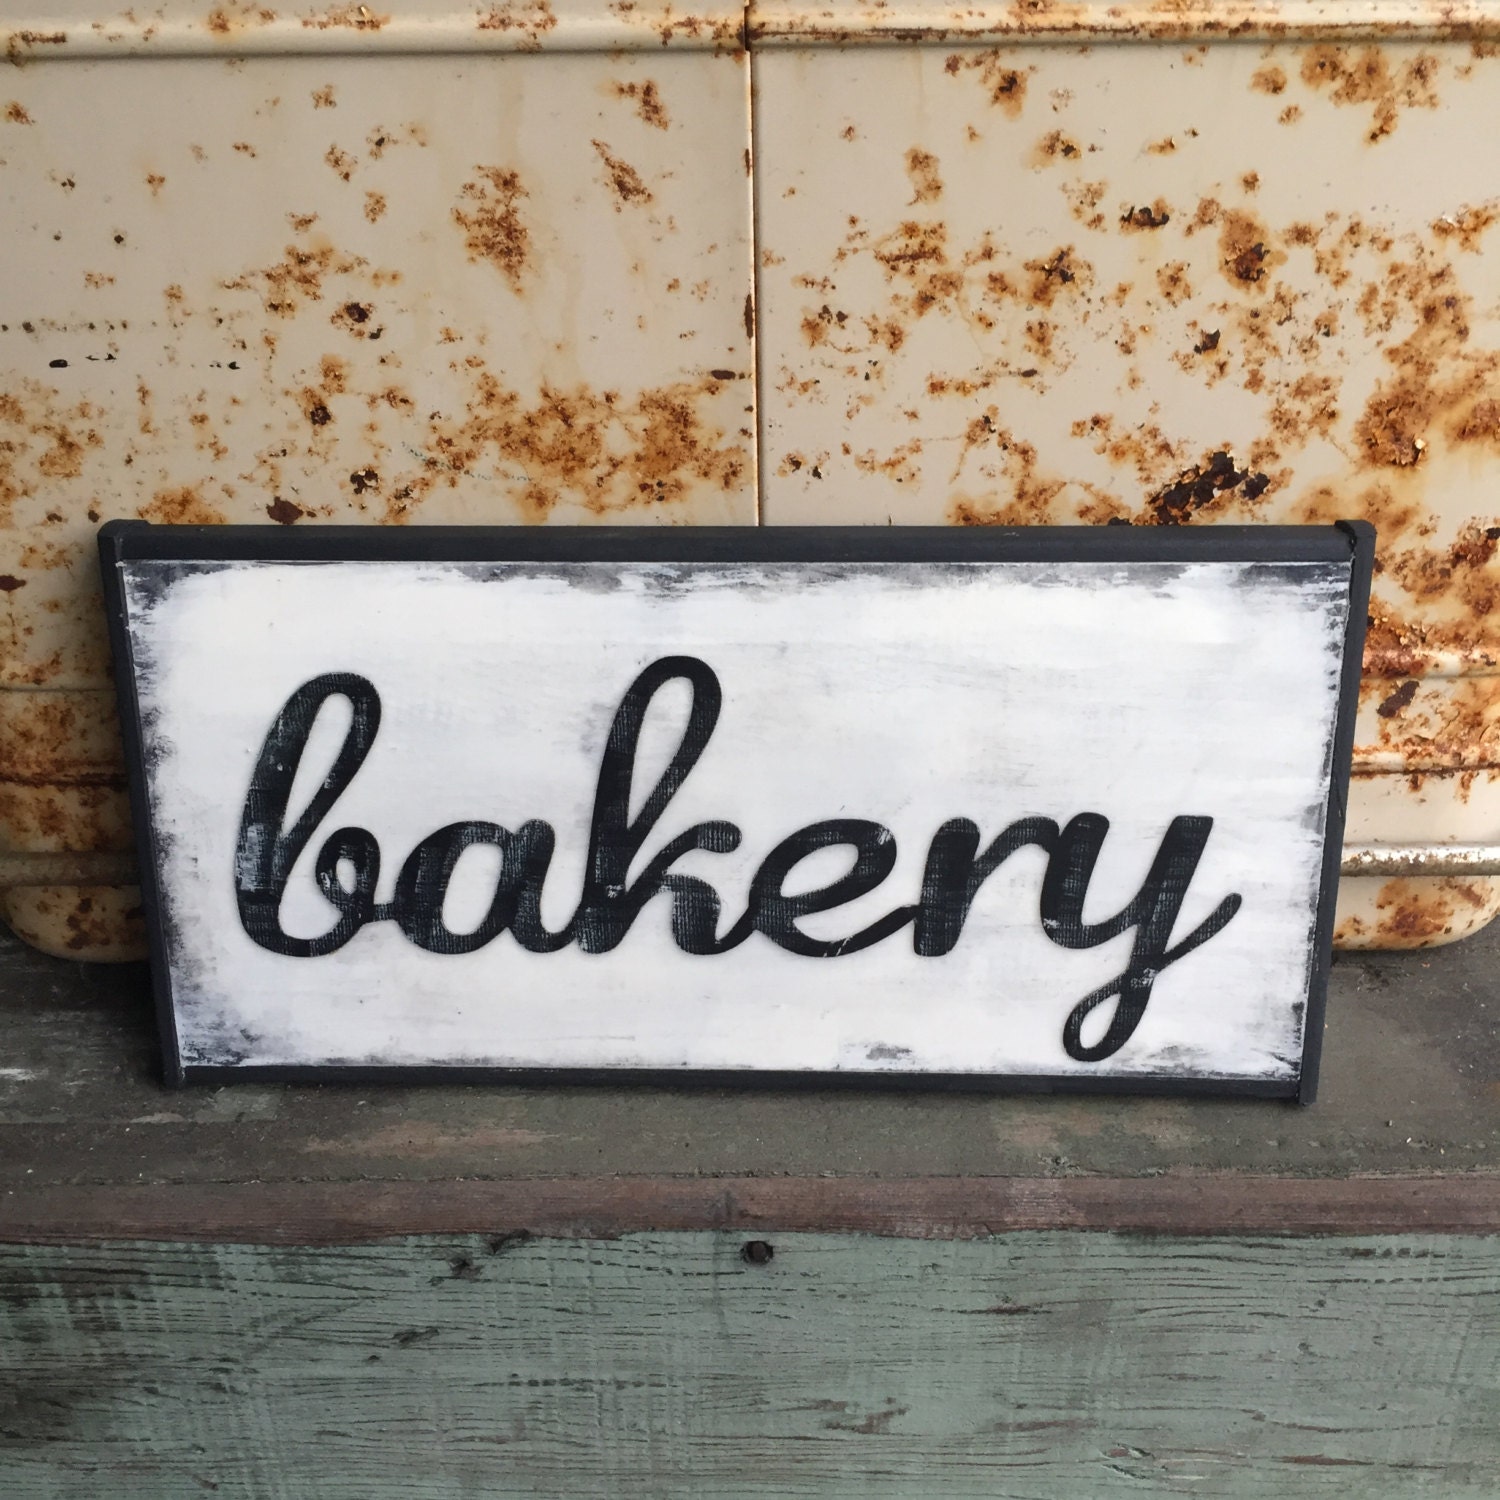 Bakery handmade sign with cursive writing and black frame